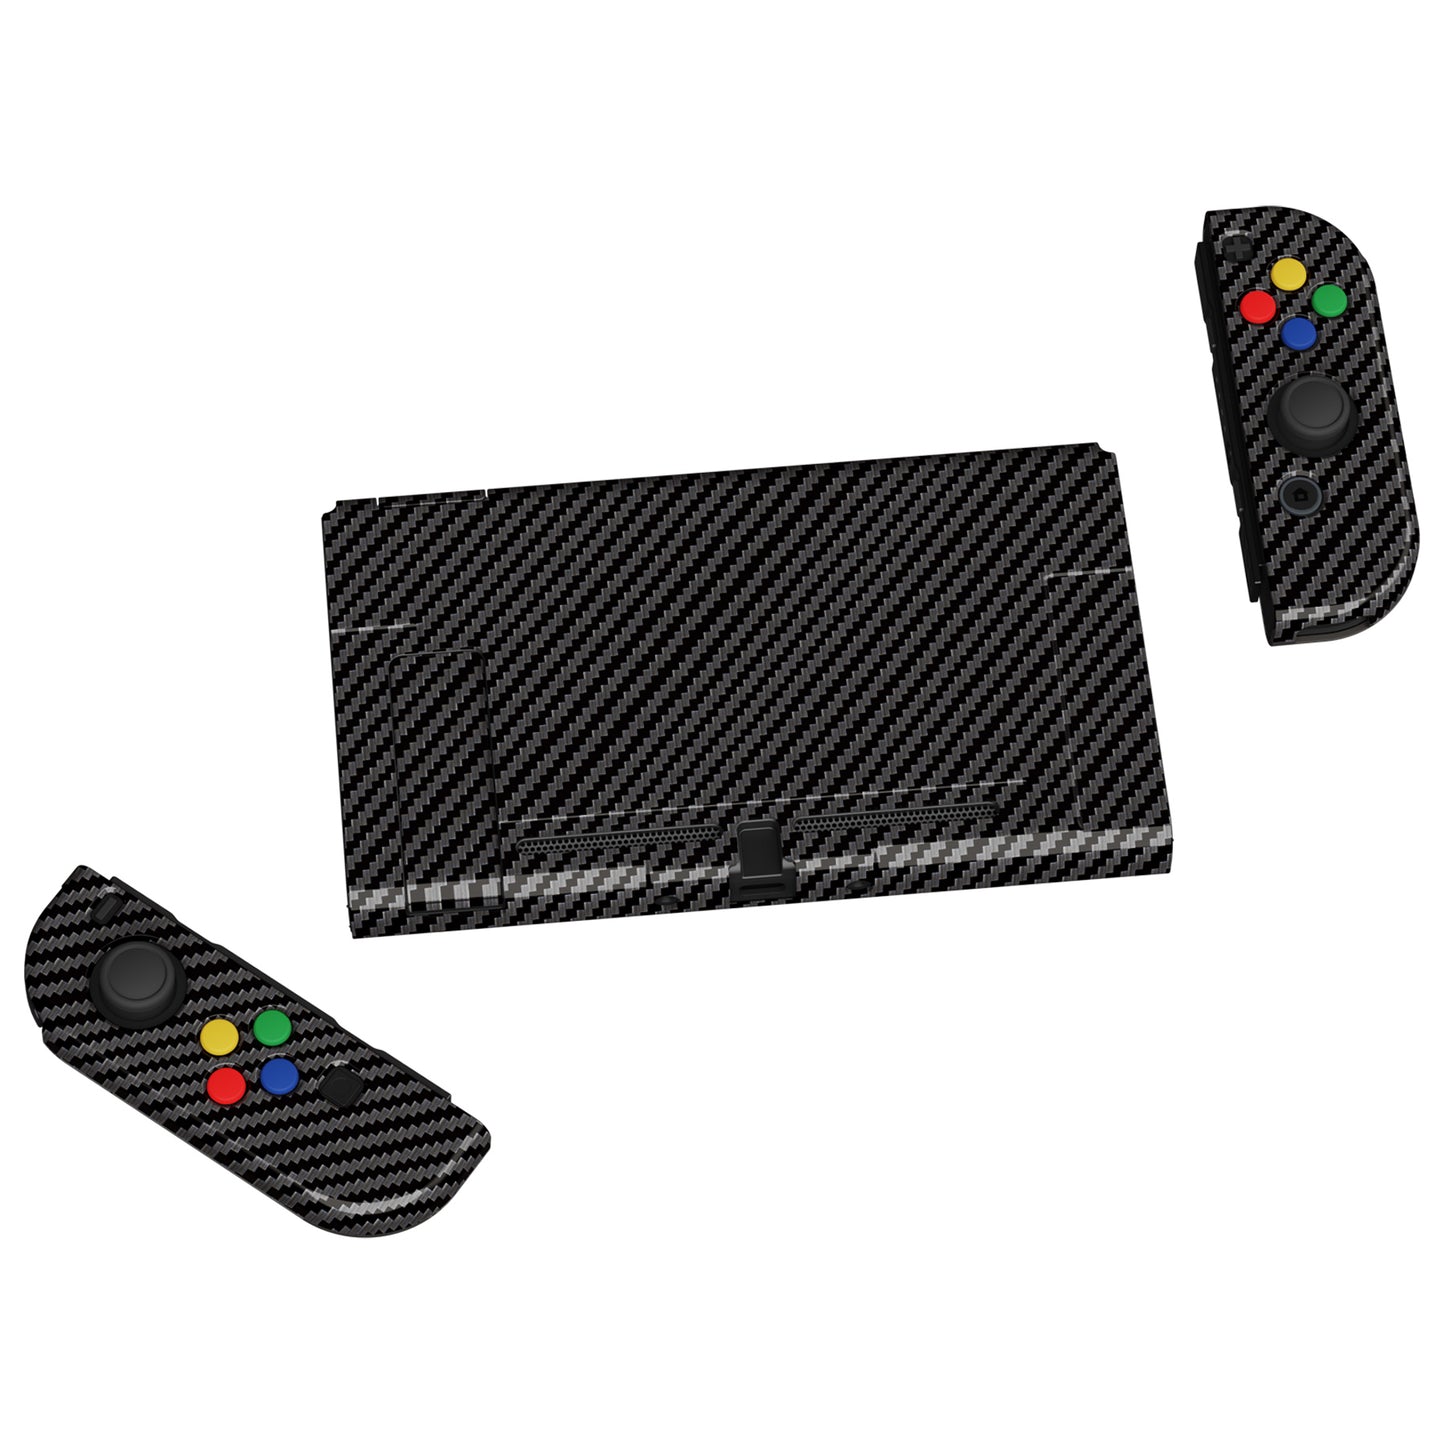 PlayVital AlterGrips Dockable Protective Case Ergonomic Grip Cover for Nintendo Switch, Interchangeable Joycon Cover w/Screen Protector & Thumb Grip Caps & Button Caps - Graphite Carbon Fiber - TNSYS2002 playvital